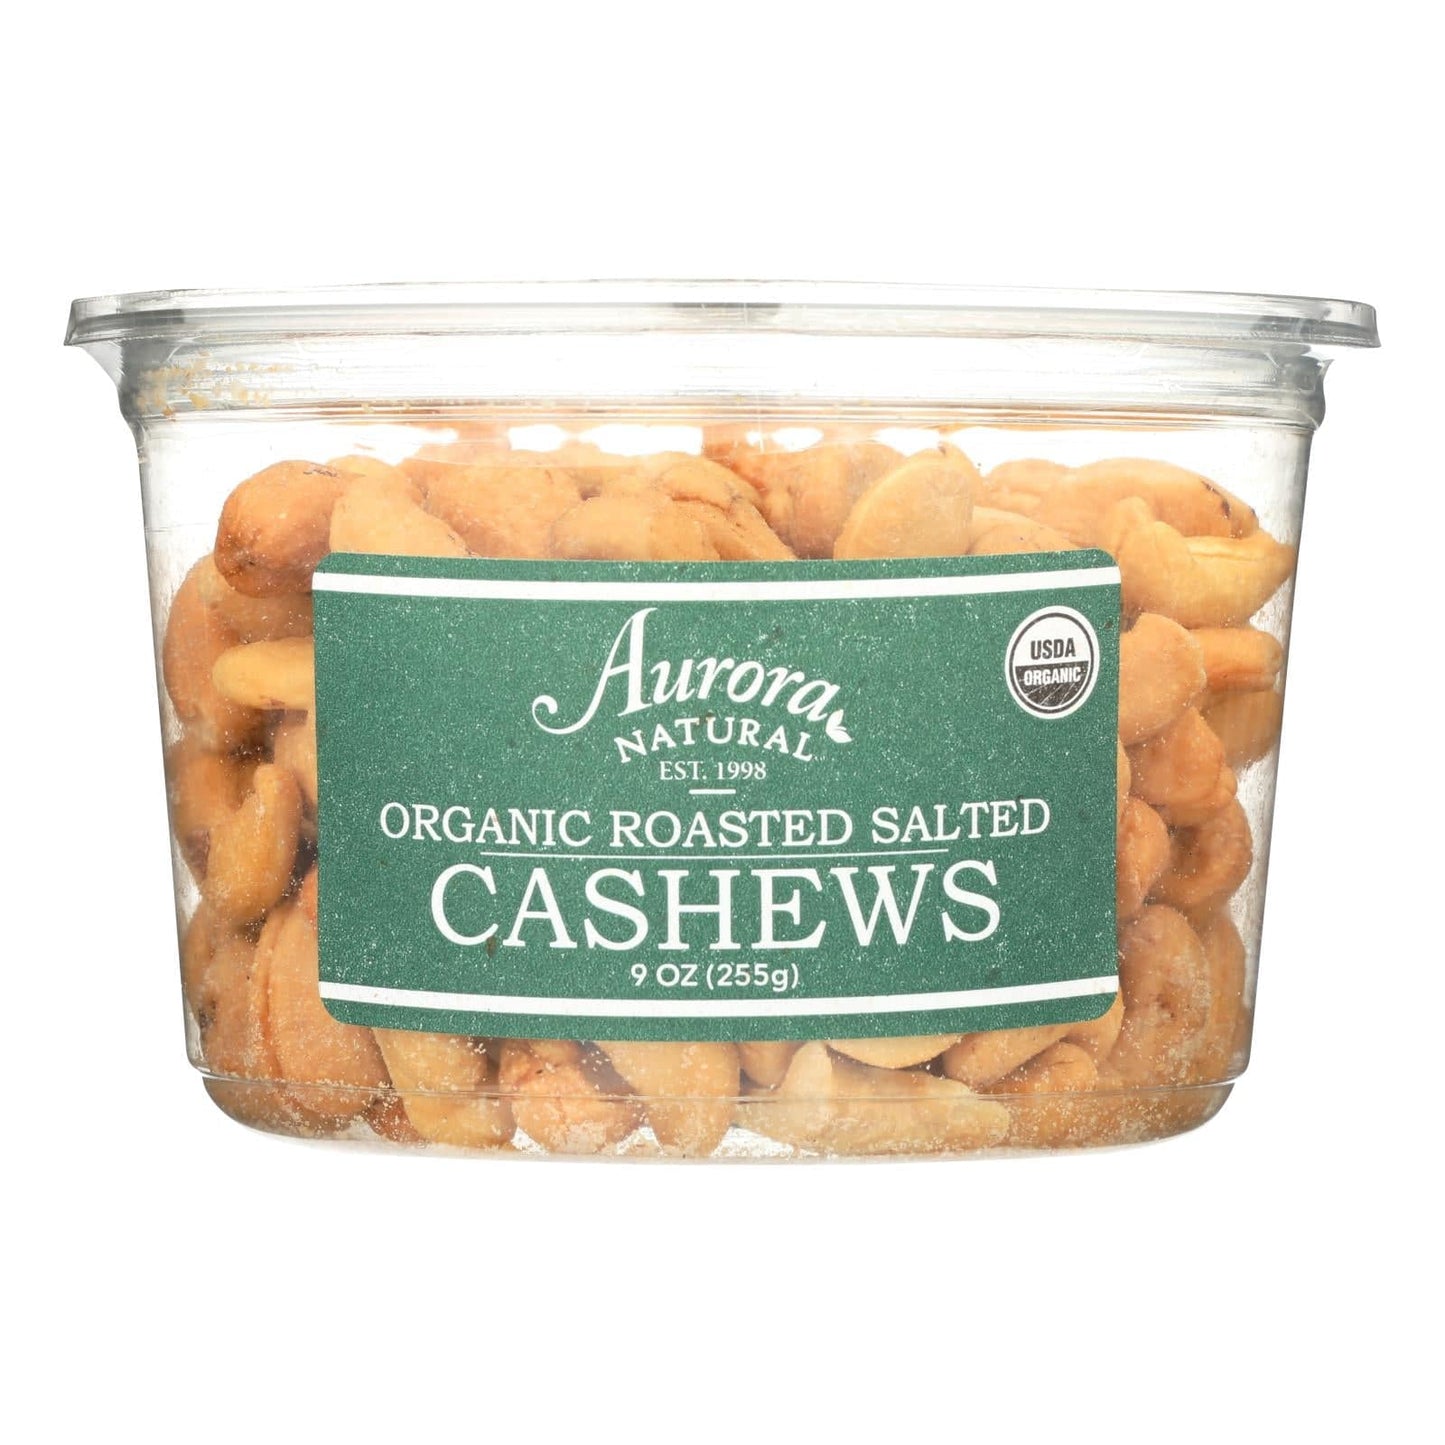 Aurora Natural Products - Organic Roasted Salted Cashews - Case Of 12 - 9 Oz. | OnlyNaturals.us